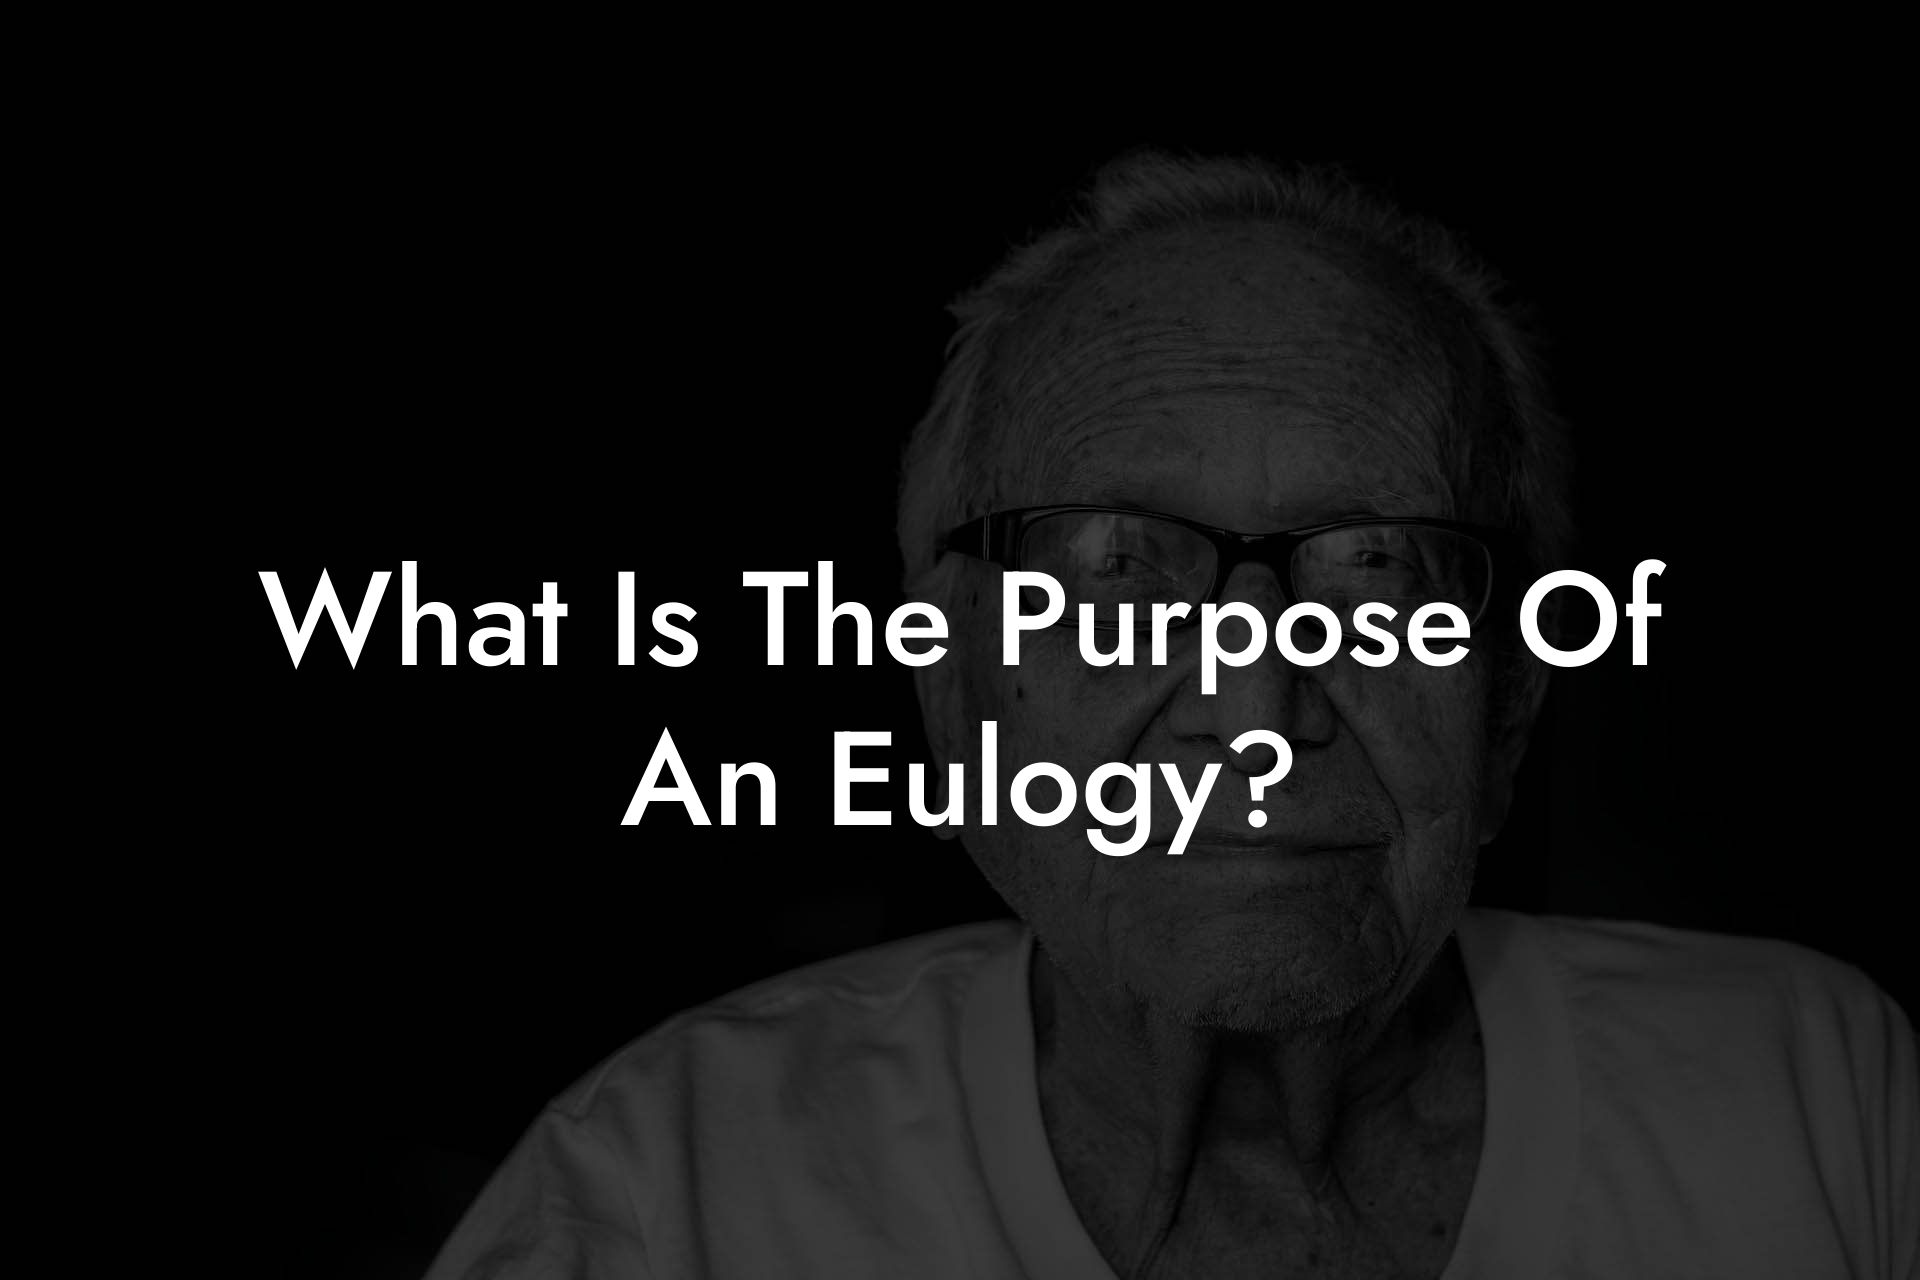 What Is The Purpose Of An Eulogy